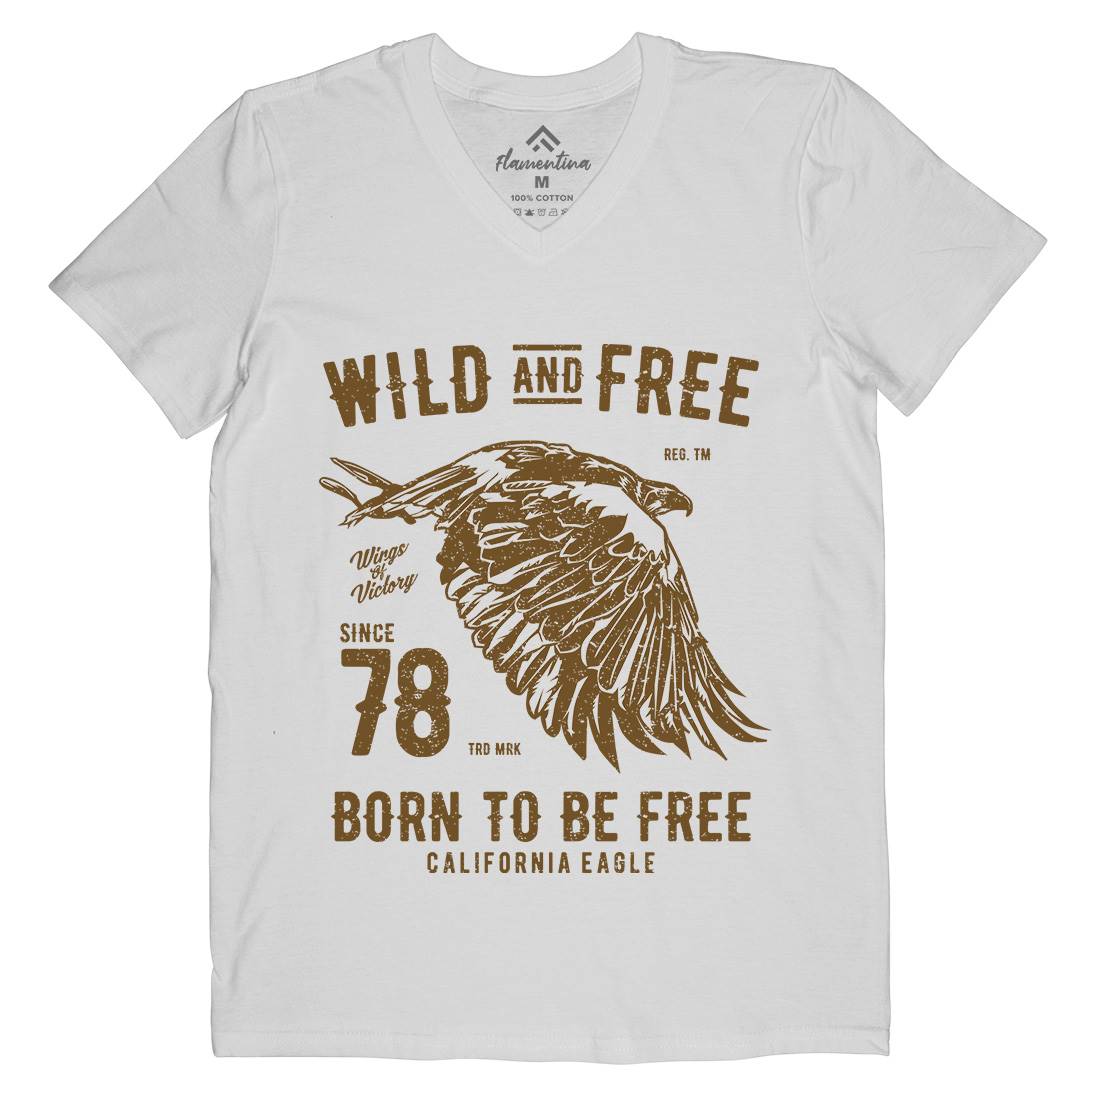 Wild And Free Mens V-Neck T-Shirt Army A792